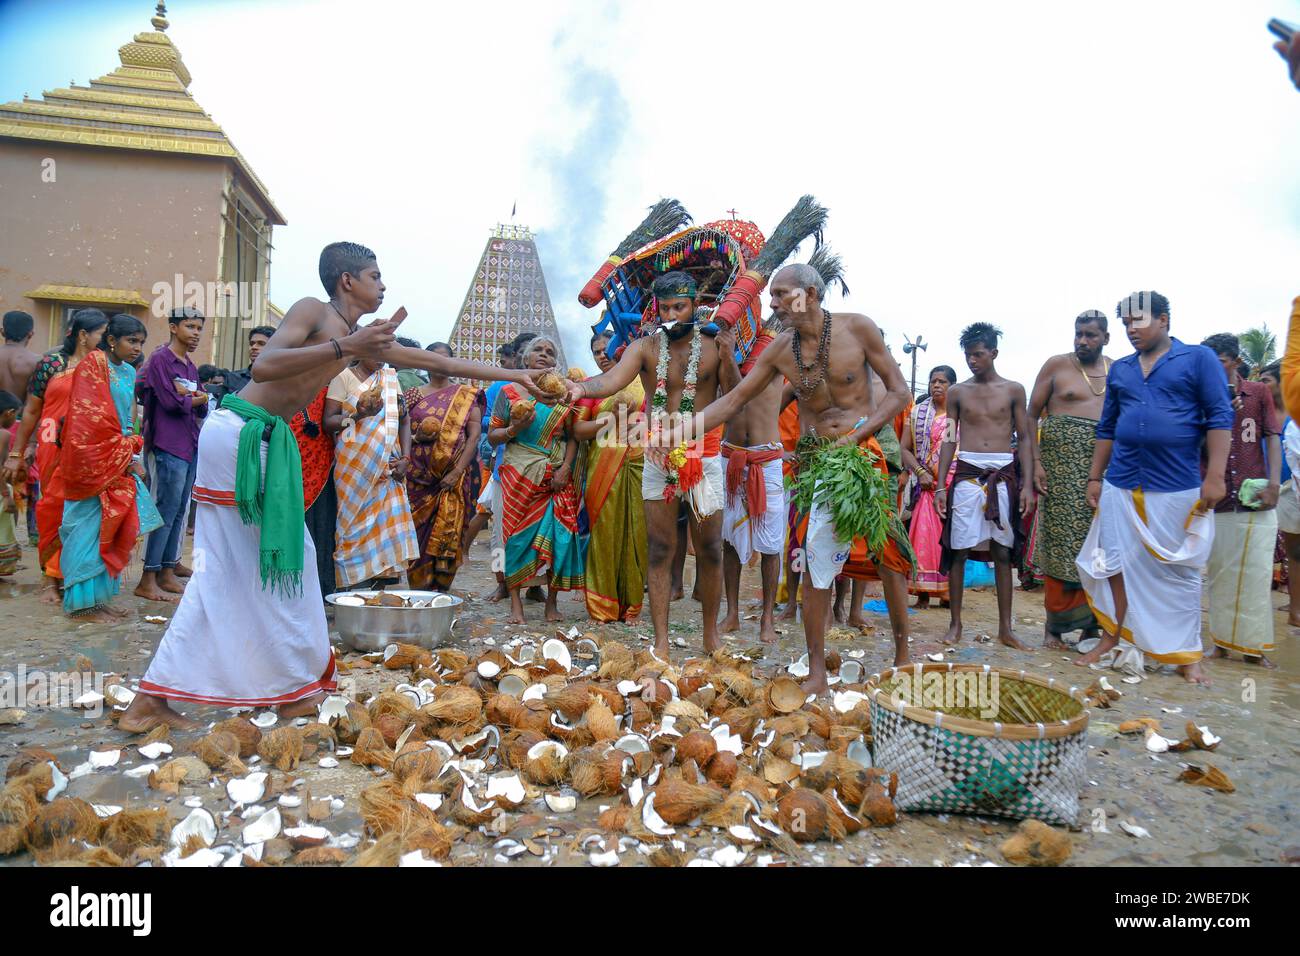 Jaffna, Sri Lanka - 25th August 2022 : The beautiful Nallur Kandaswamy Kovil temple is an important place of worship for local Hindus. Men must remove Stock Photo